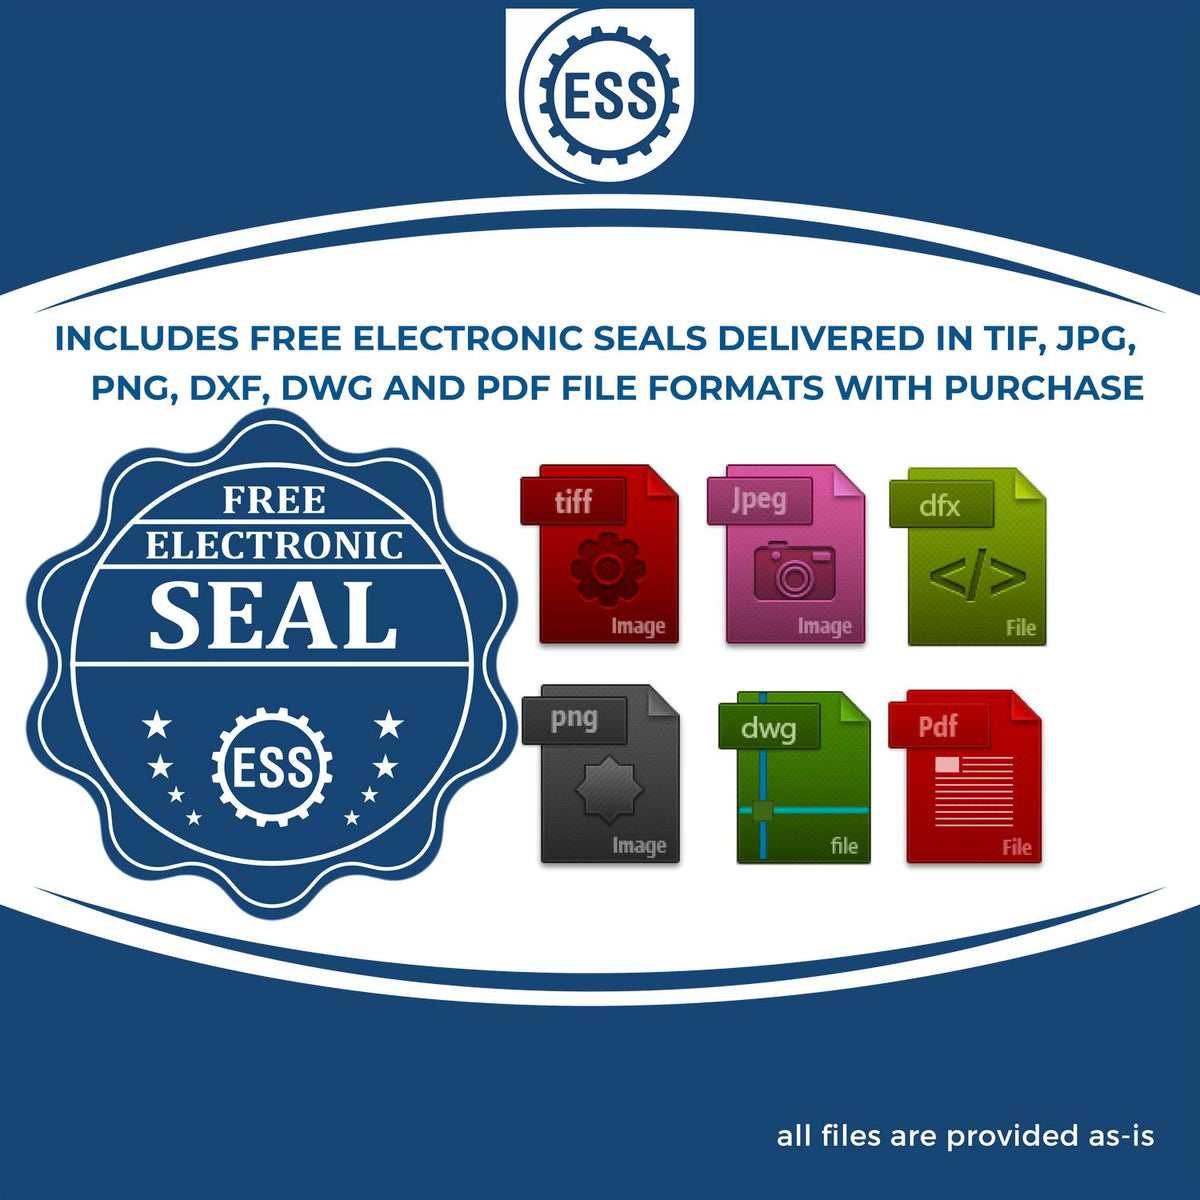 An infographic for the free electronic seal for the Slim Pre-Inked Montana Professional Engineer Seal Stamp illustrating the different file type icons such as DXF, DWG, TIF, JPG and PNG.